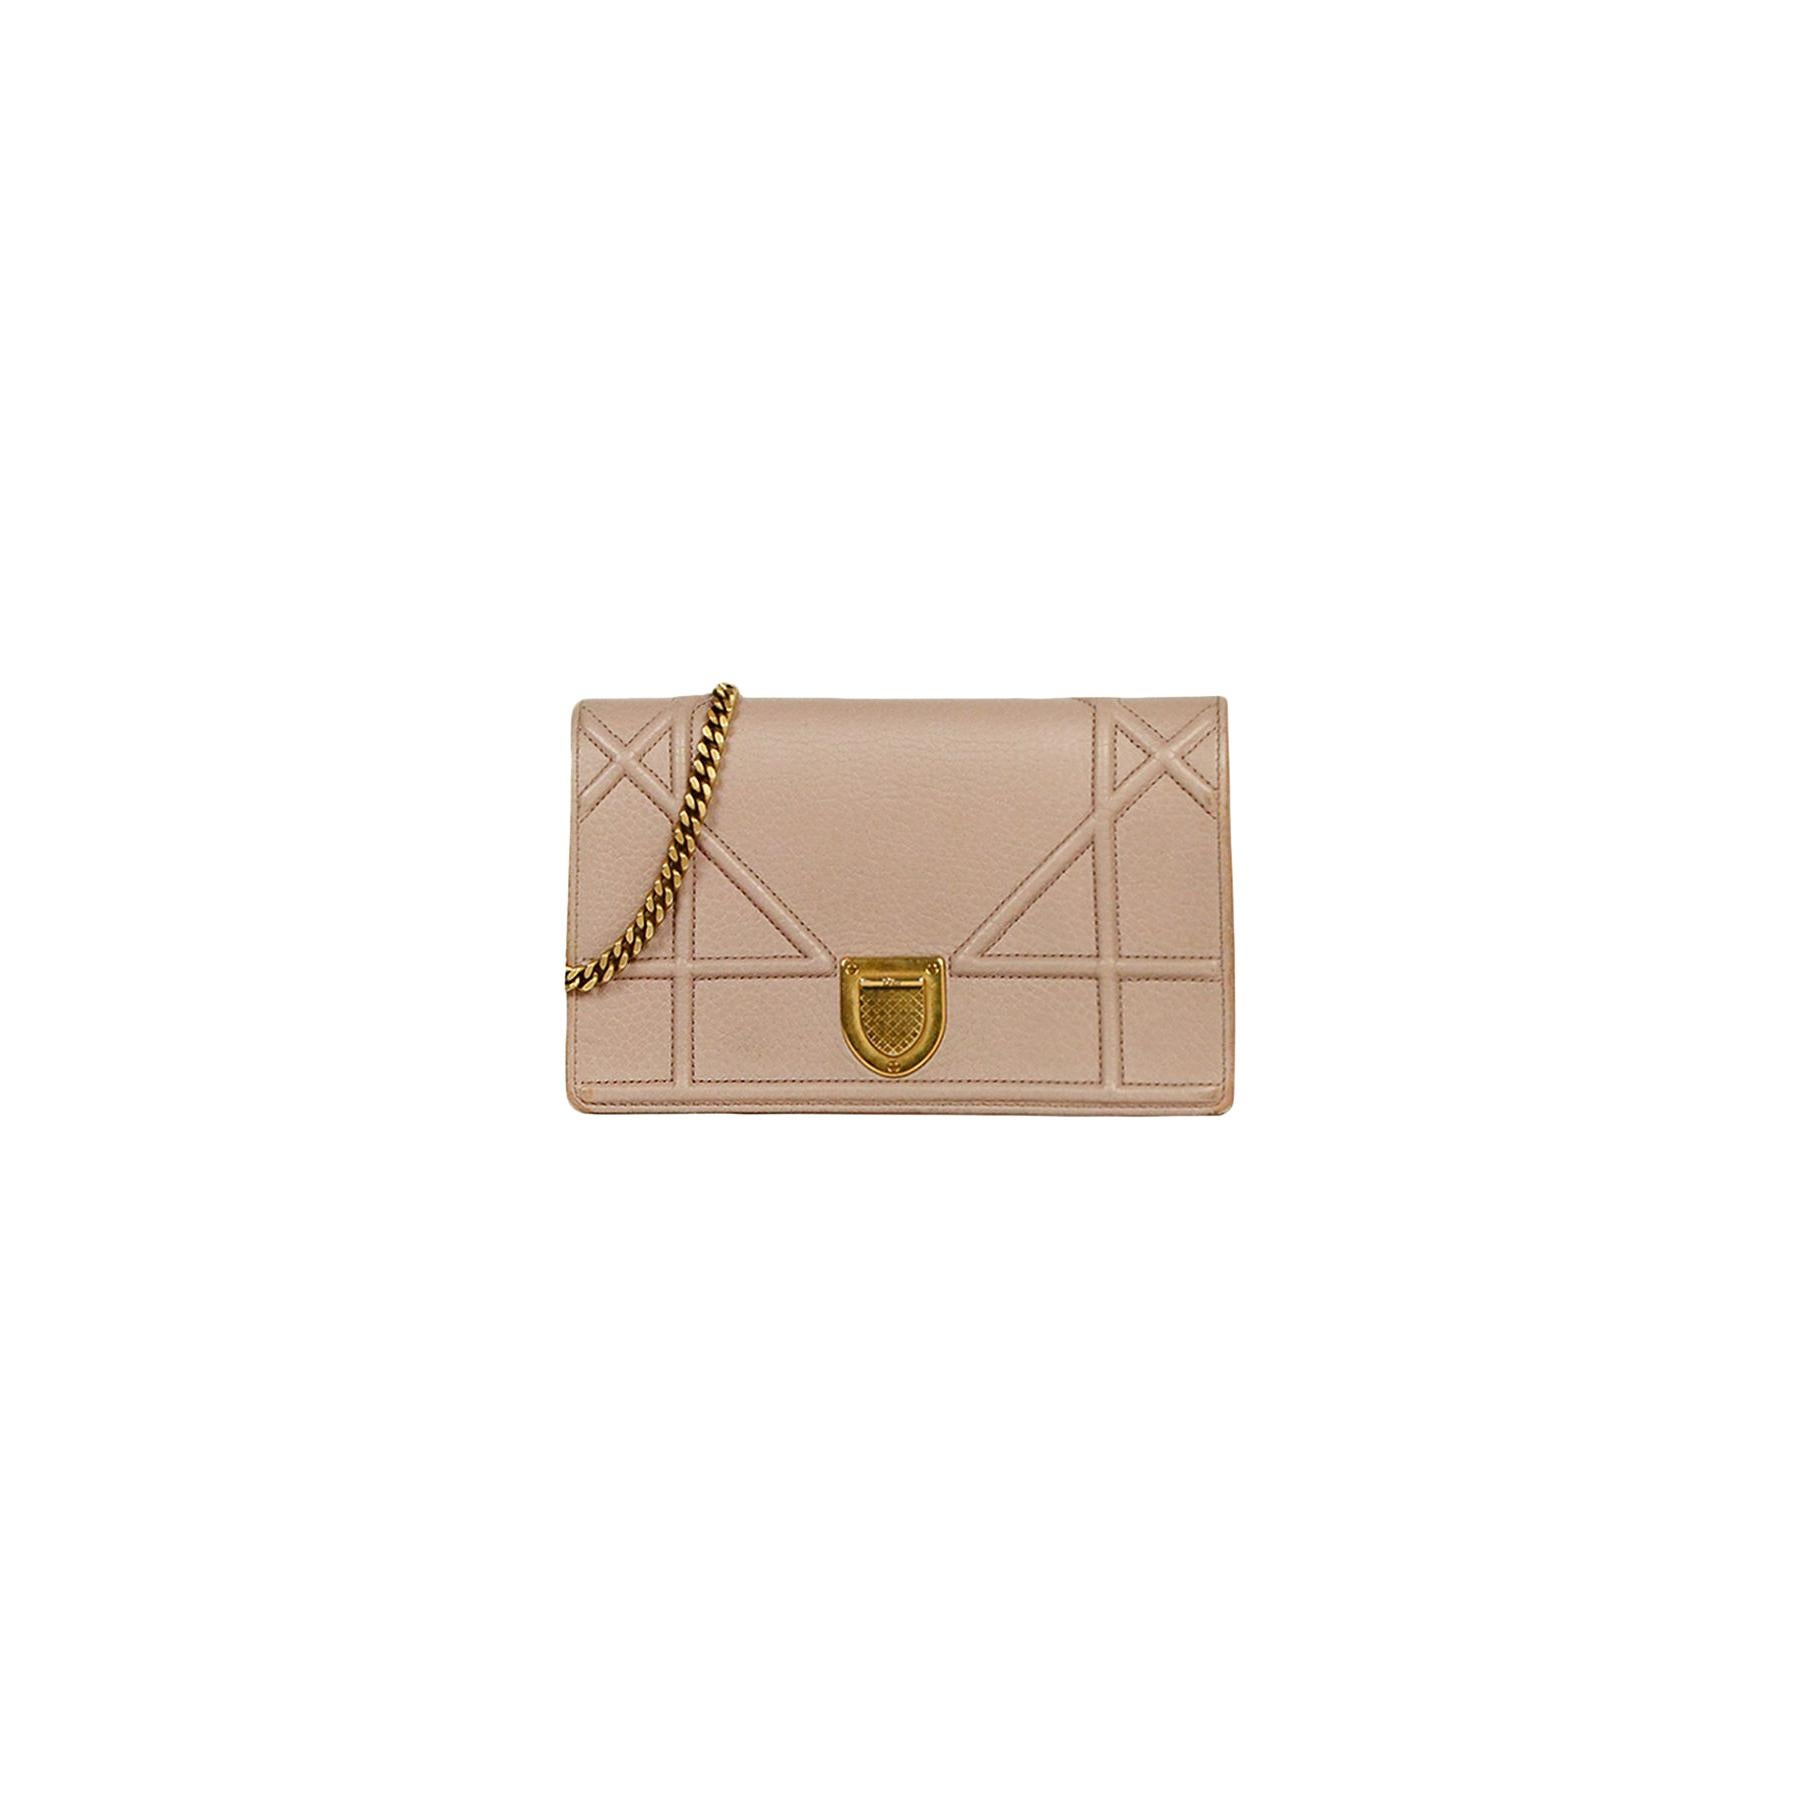 Christian Dior Taupe Leather "Diorama" Wallet on Chain Crossbody Bag rt. $1, 650